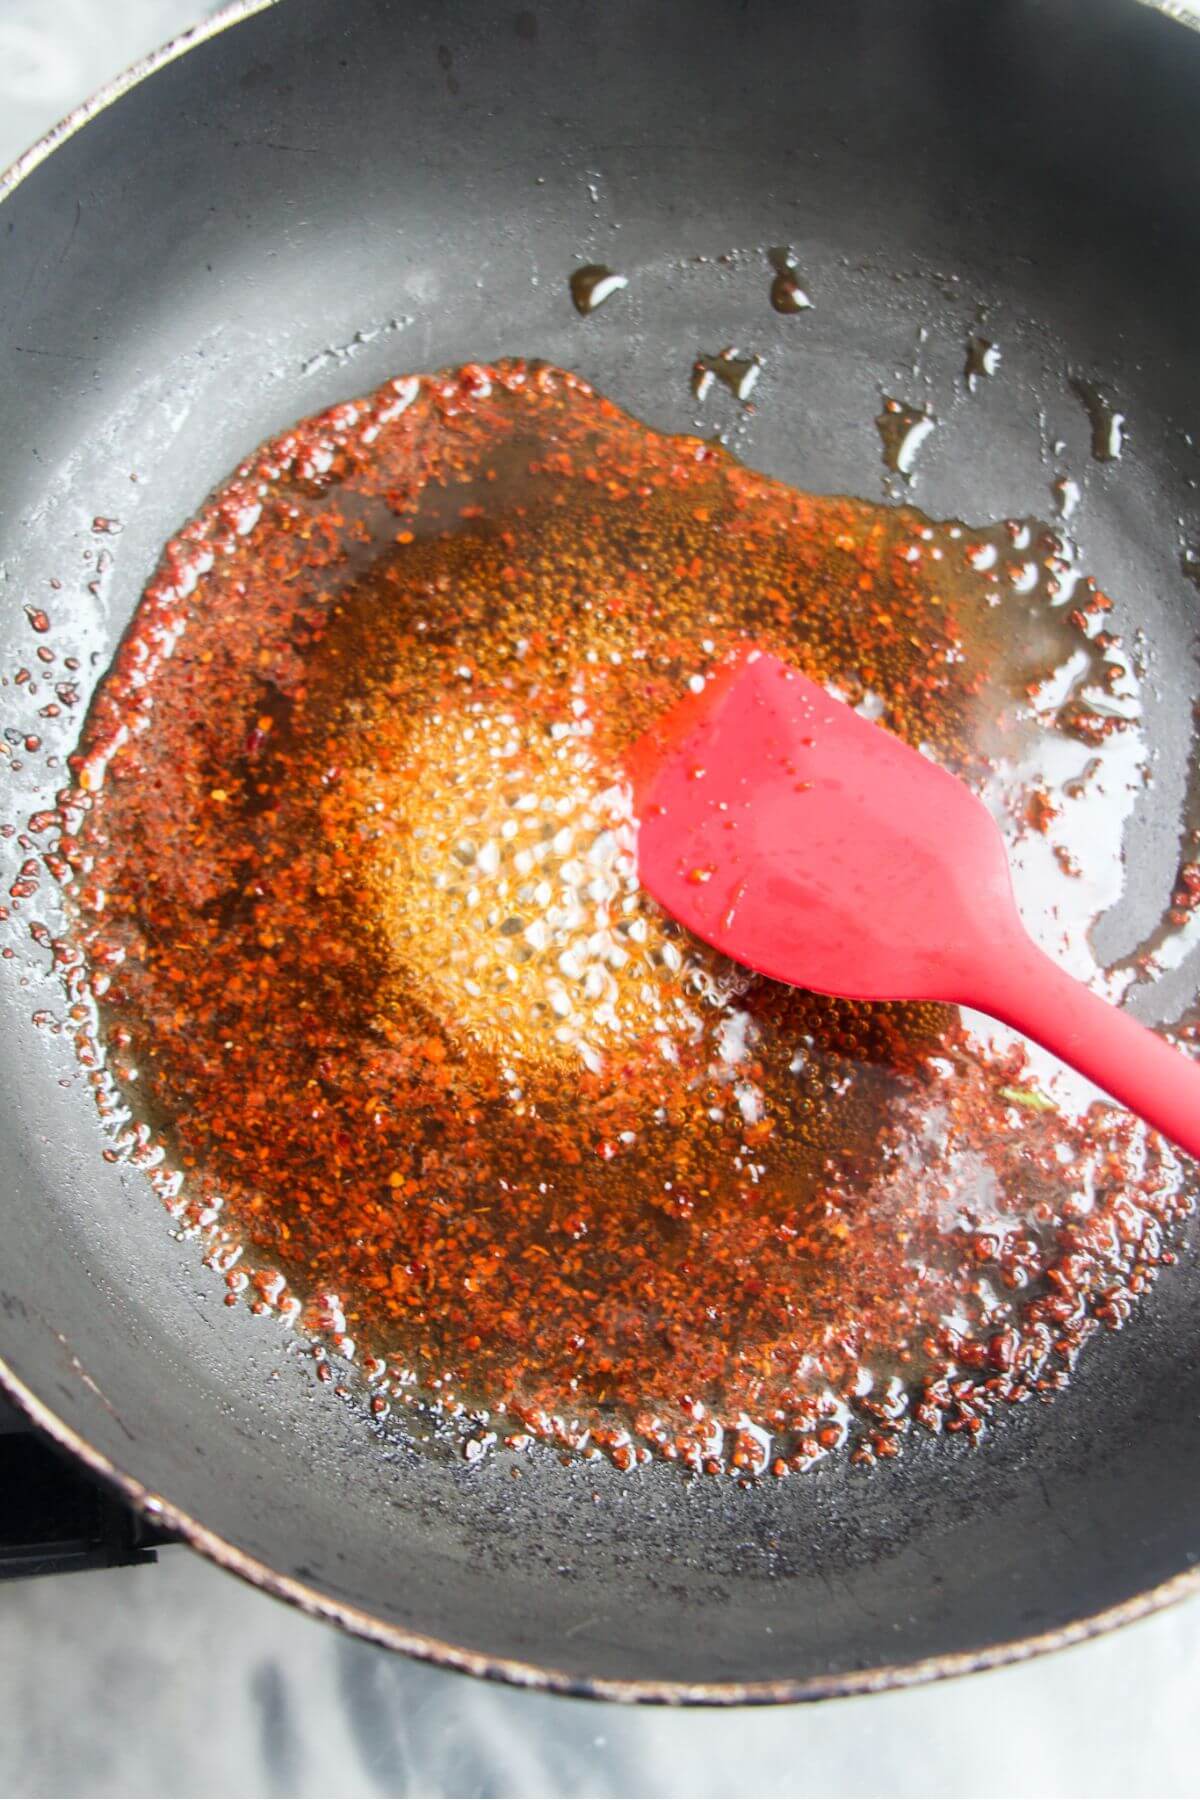 Honey and chilli flakes bubbling up in a small black pan, being stirred with a red spatula.